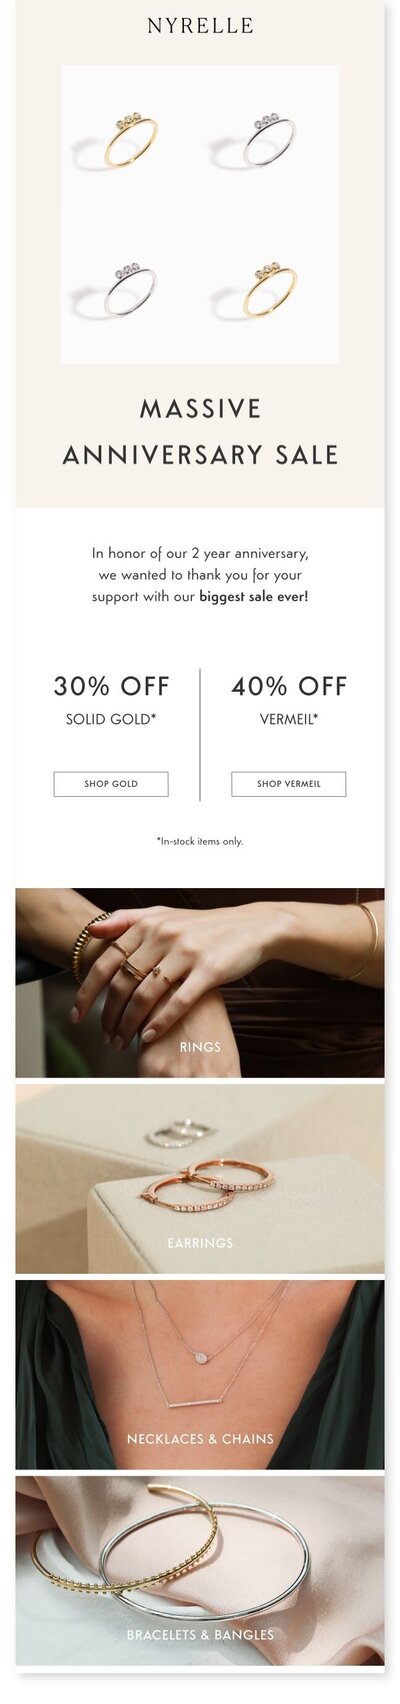 Fashion Graphic Designer in Hong Kong Kyra Janelle's Promotional Sale Email Campaign Template for Jewelry Brand NYRELLE with High-Conversion Rate.